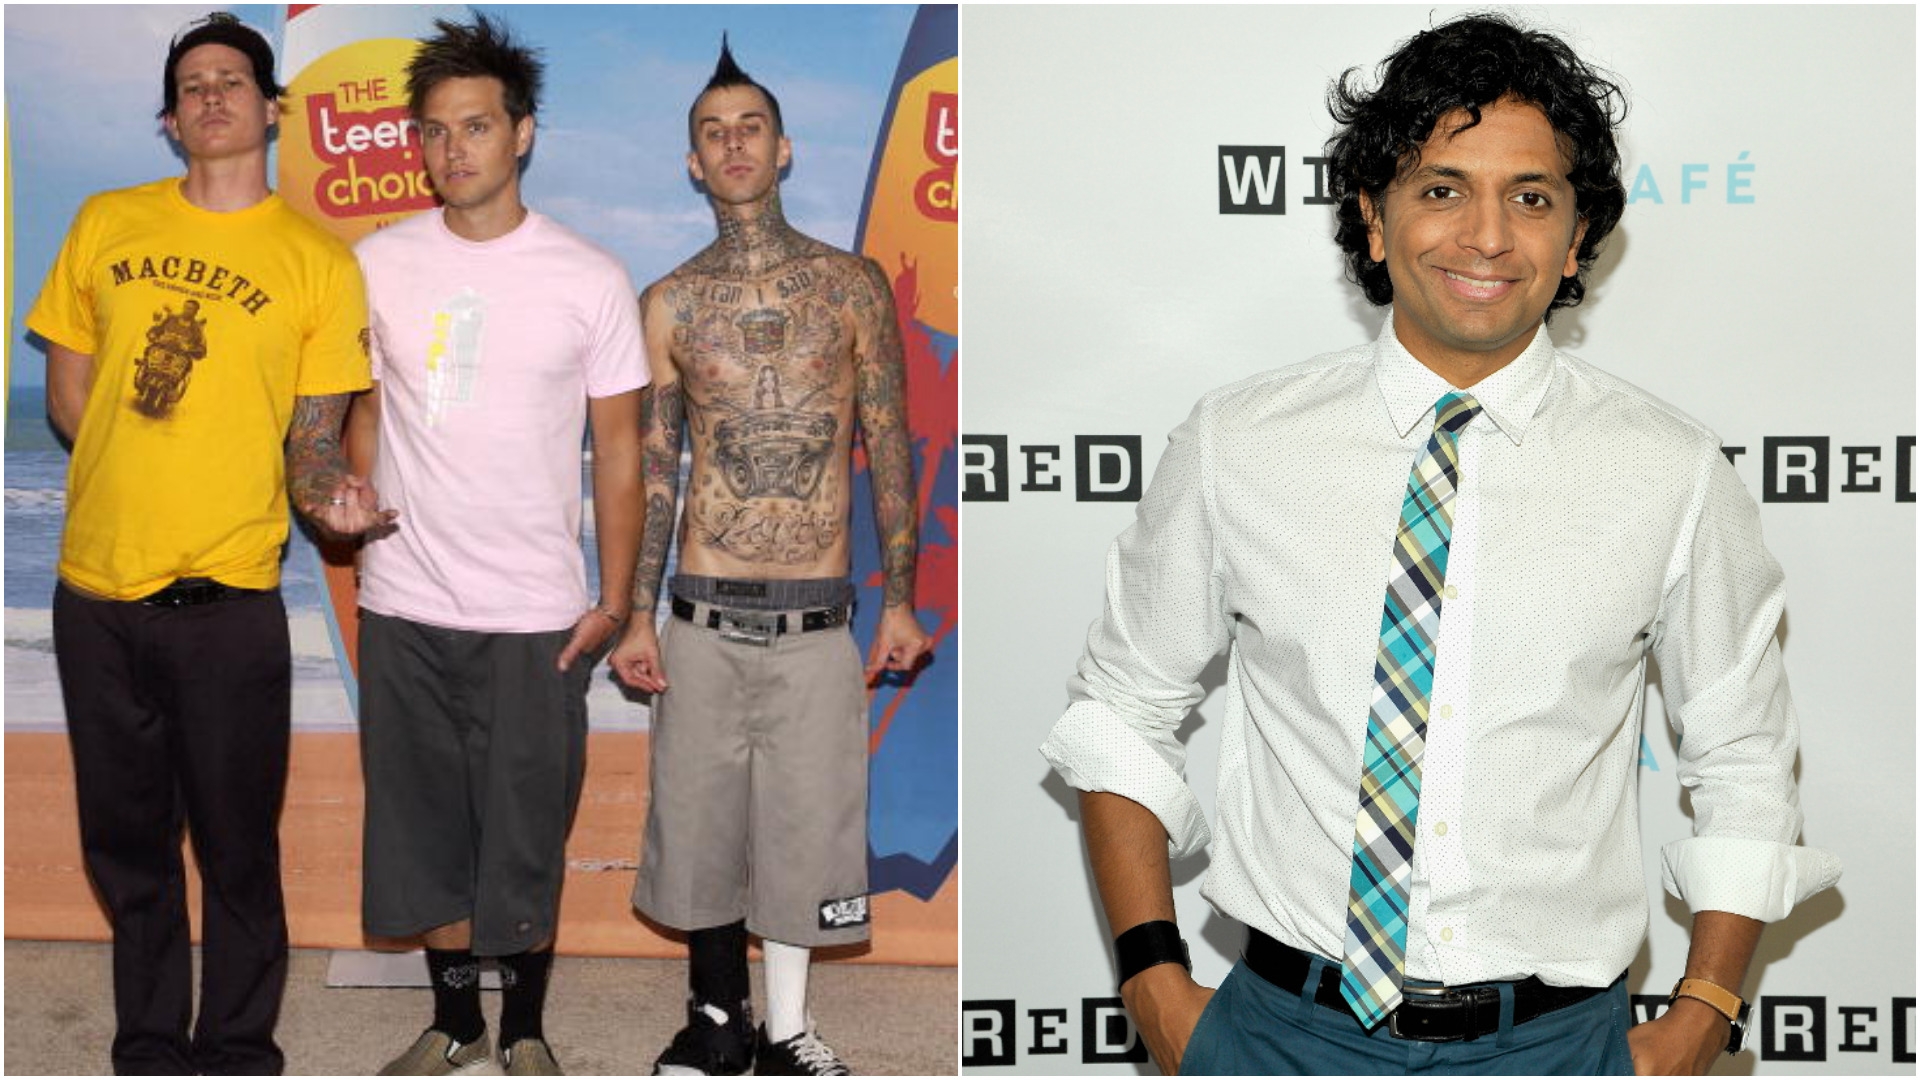 Here’s a twist for you: M. Night Shyamalan considered directing a Blink-182 video